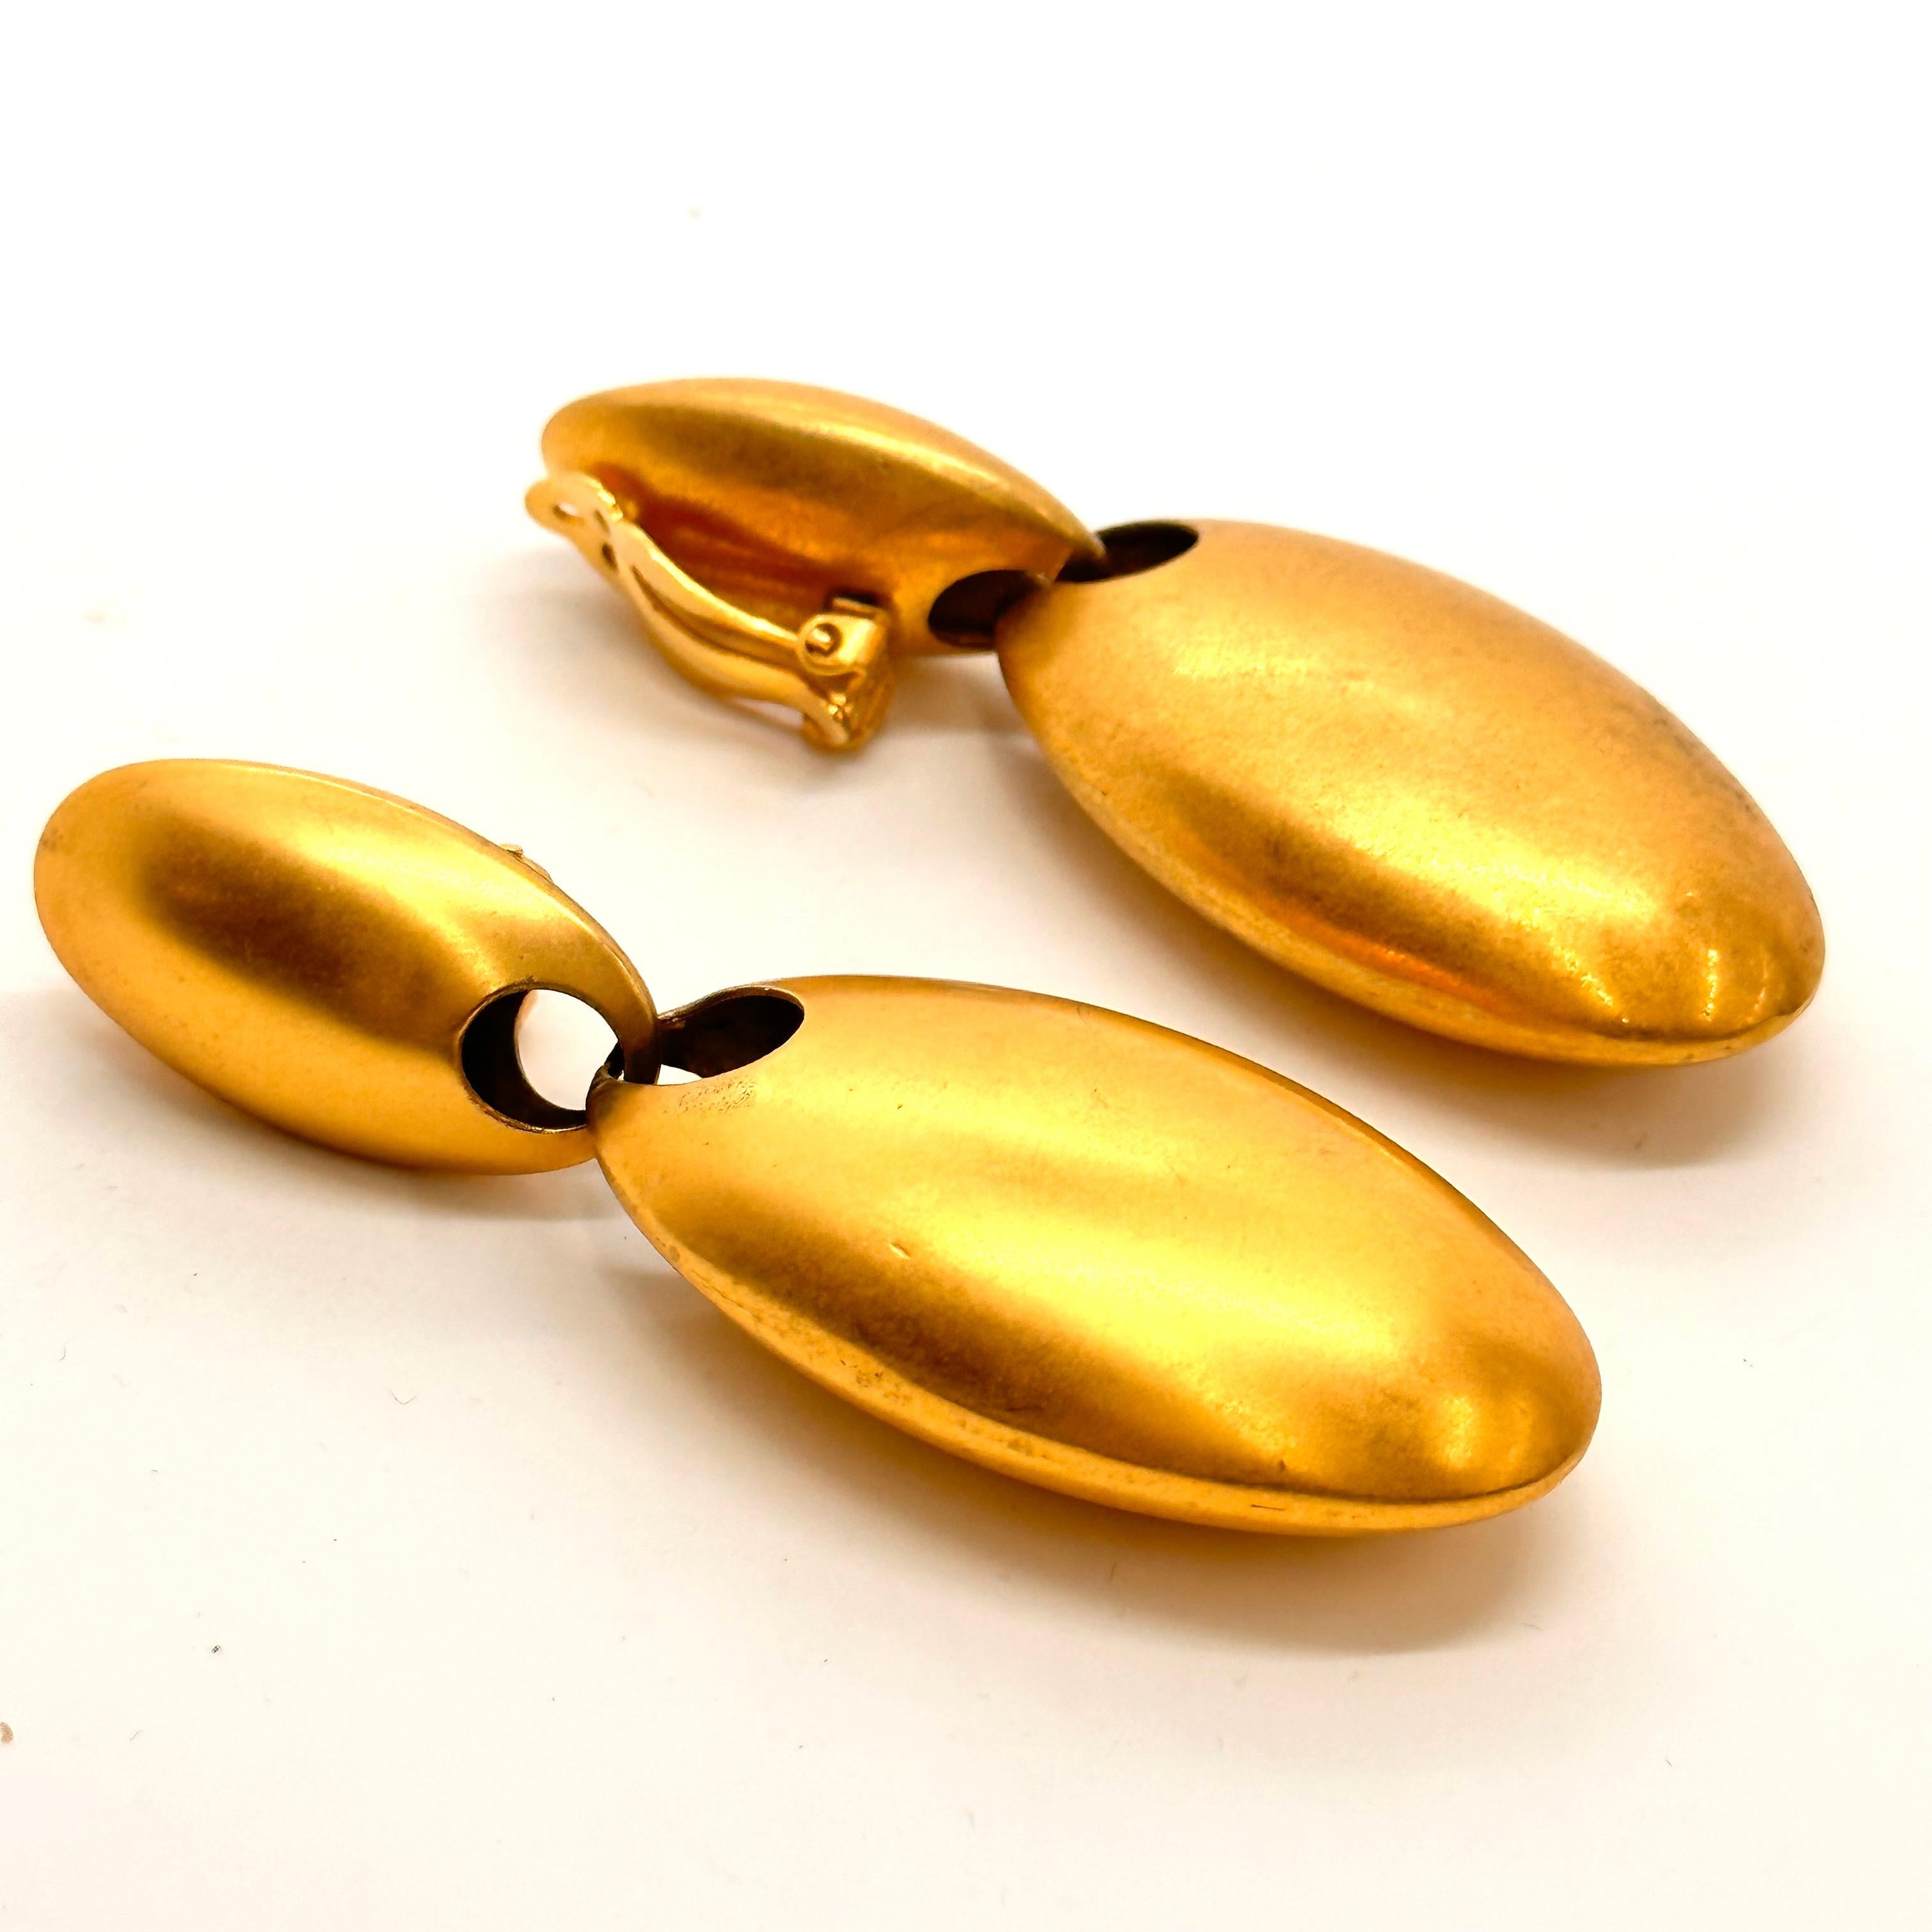 In 1989 Robert Lee Morris created a collection of matte gold plated brass jewelry for Donna Karan all in the theme of egg forms. These voluptuous clip earrings are constructed of two hollow elongated egg forms that hang perpendicular to one another.